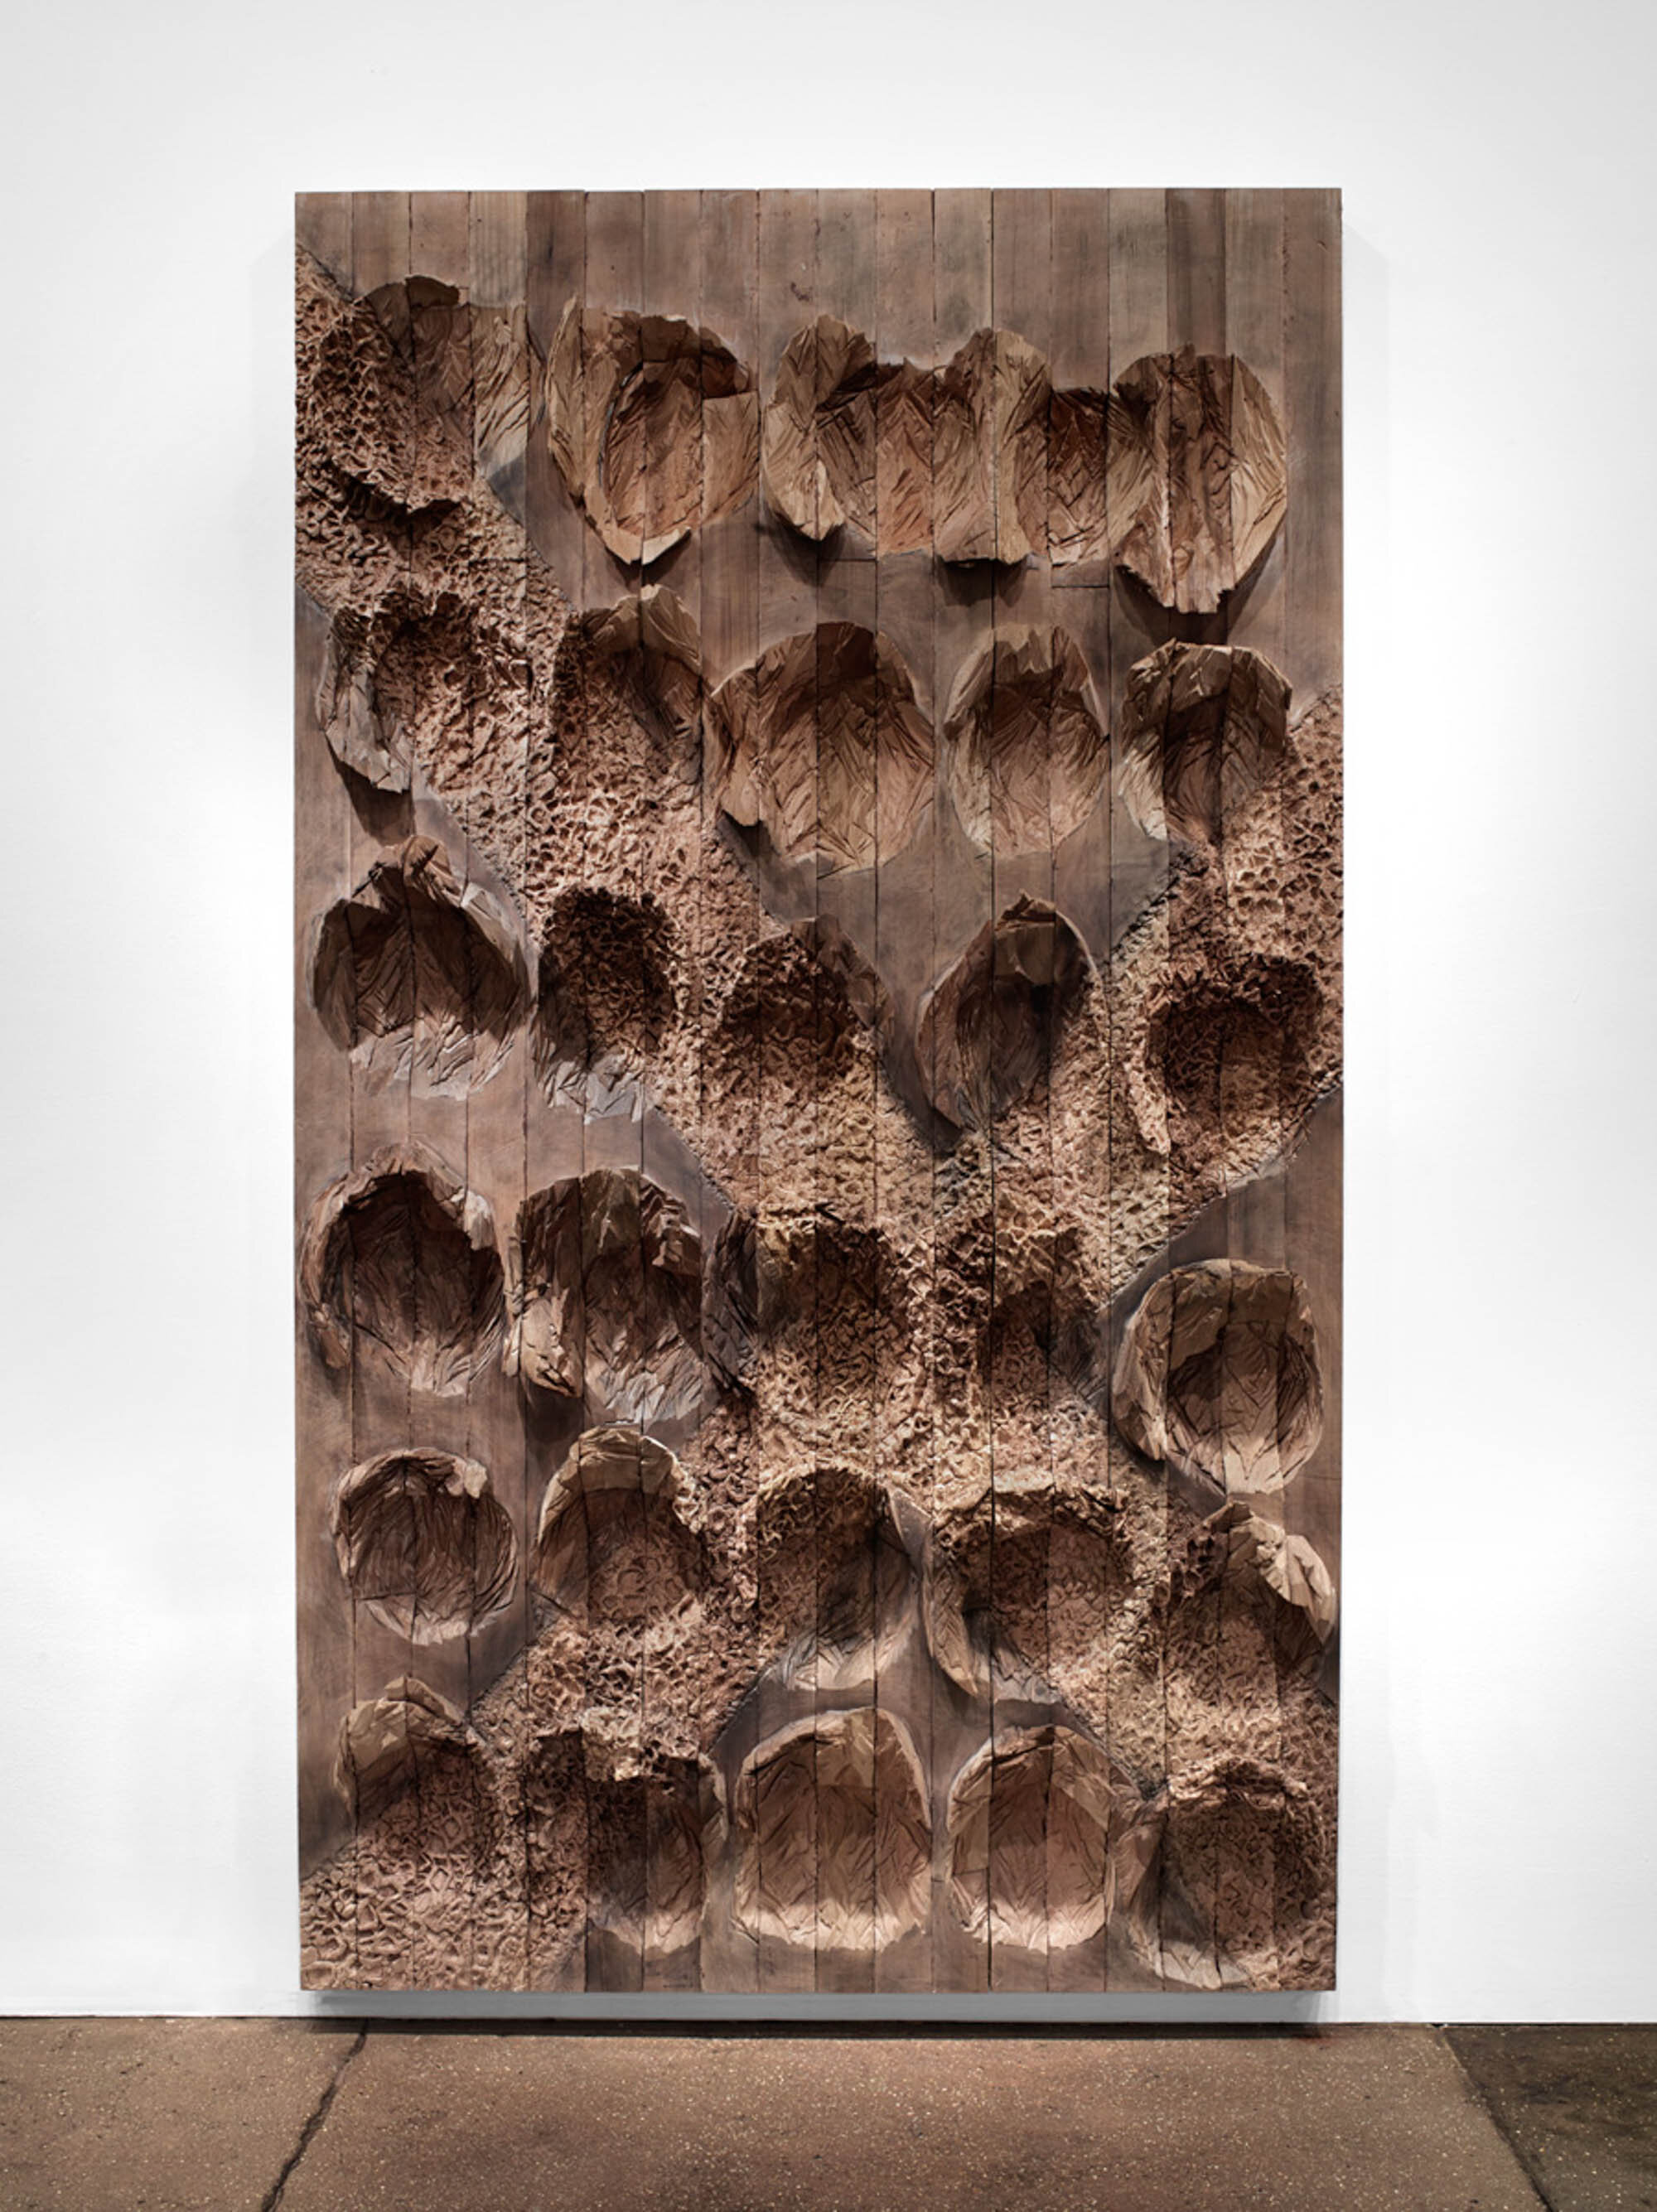       Quarter Moon Crazies , 2014 Cedar and graphite 108 x 59 x 7 in.    MORE IMAGES   Galerie Lelong &amp; Co.  